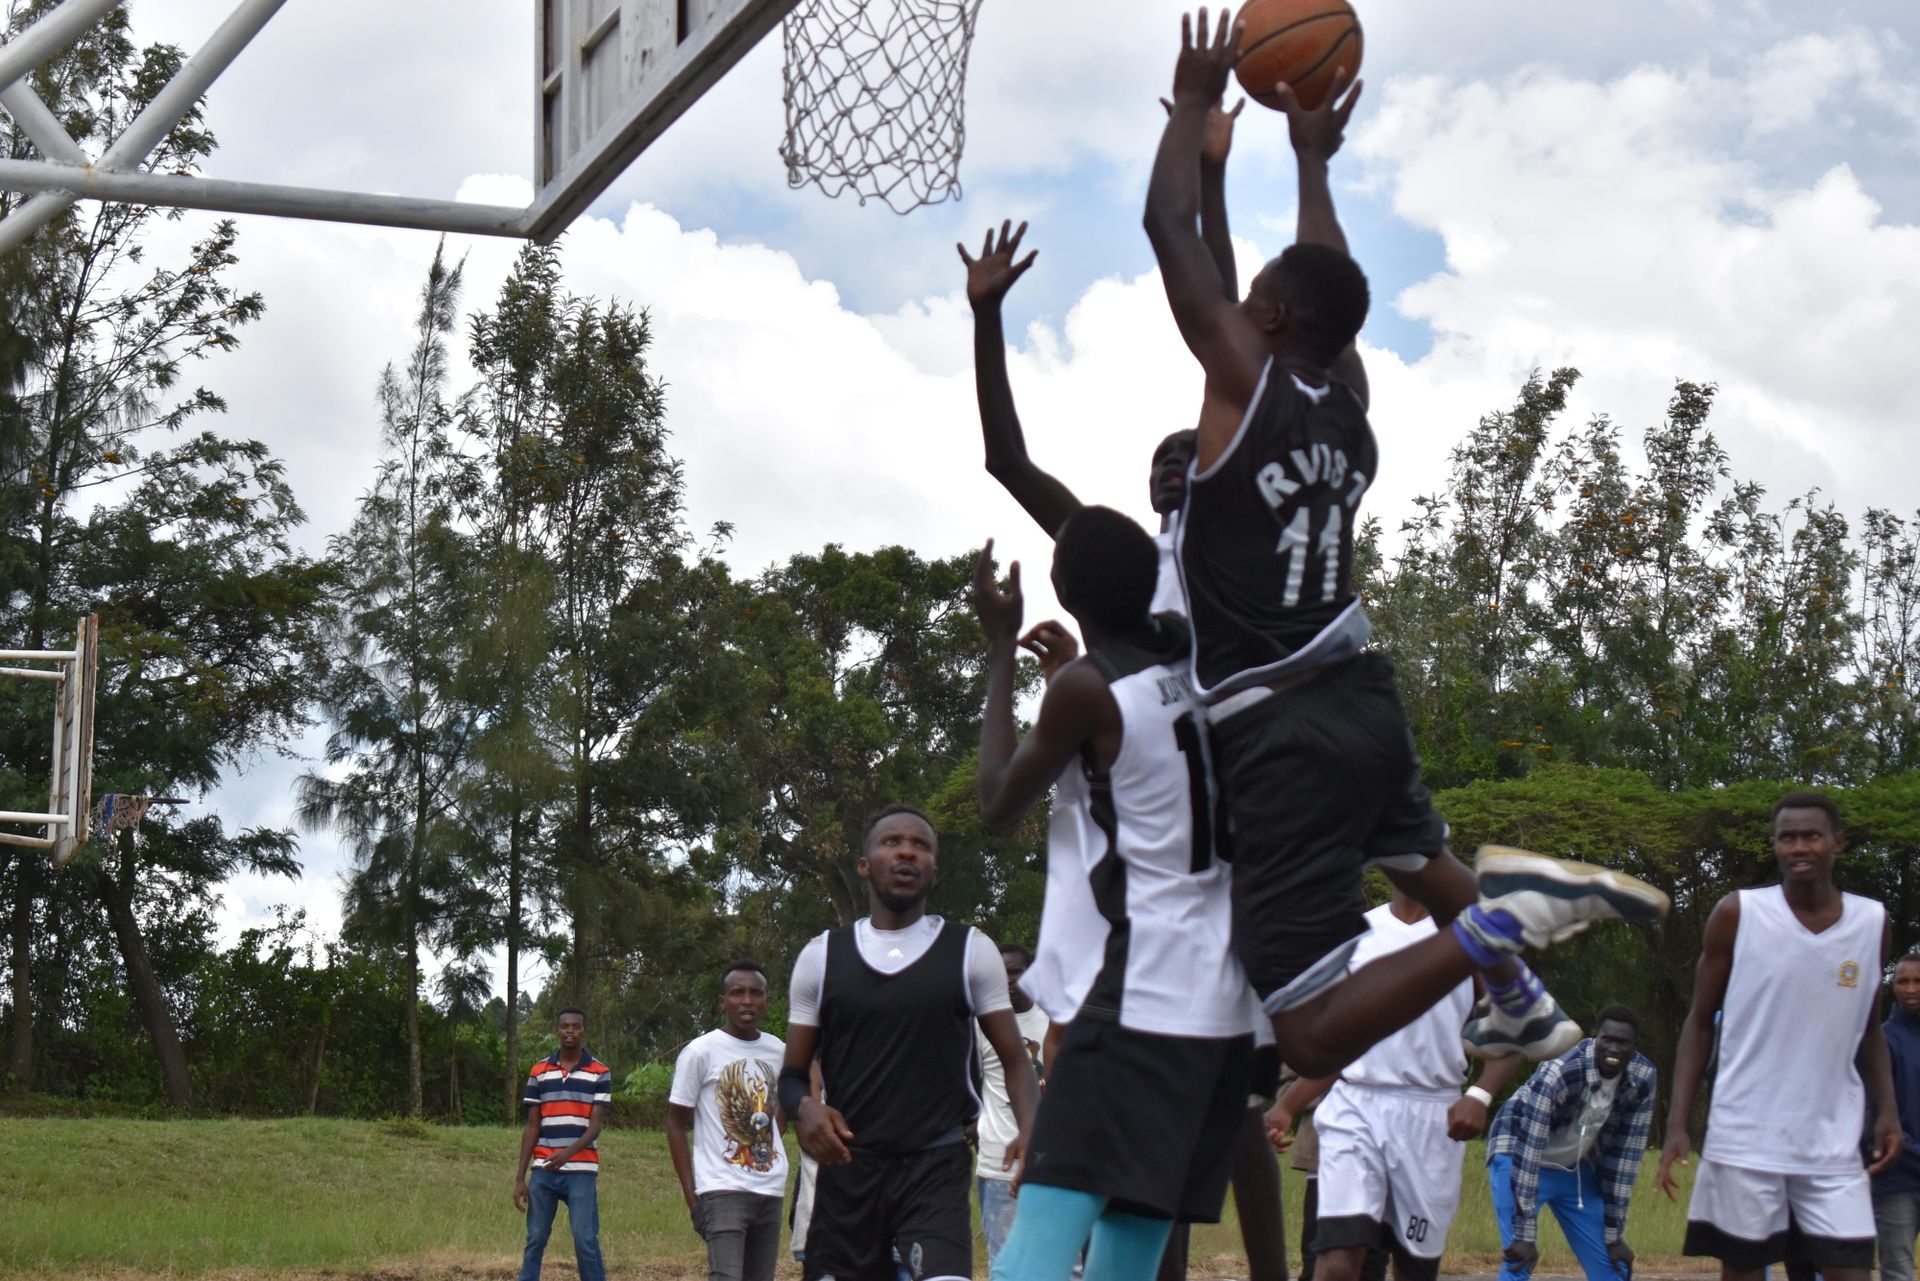 Exciting season ahead: Nakuru Universities Colleges Basketball League set to deliver thrilling matches